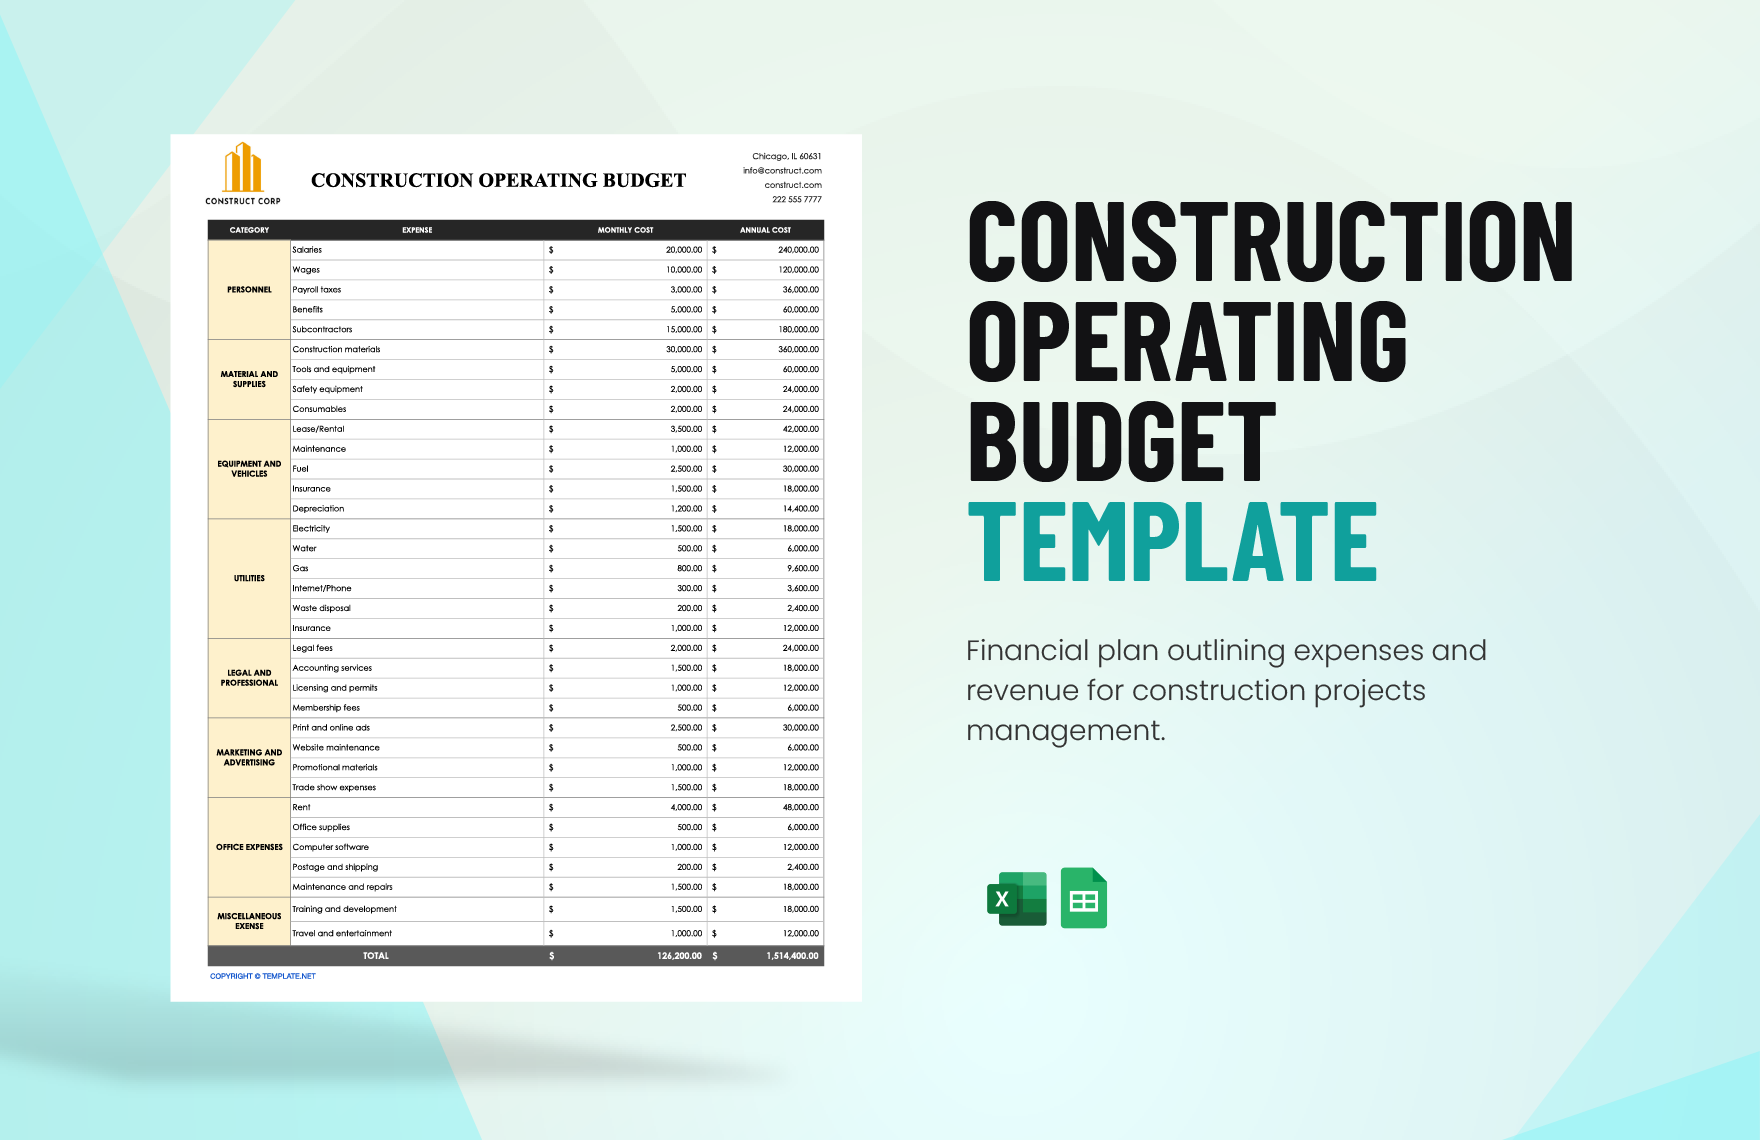 Construction Operating Budget in Excel, Google Sheets